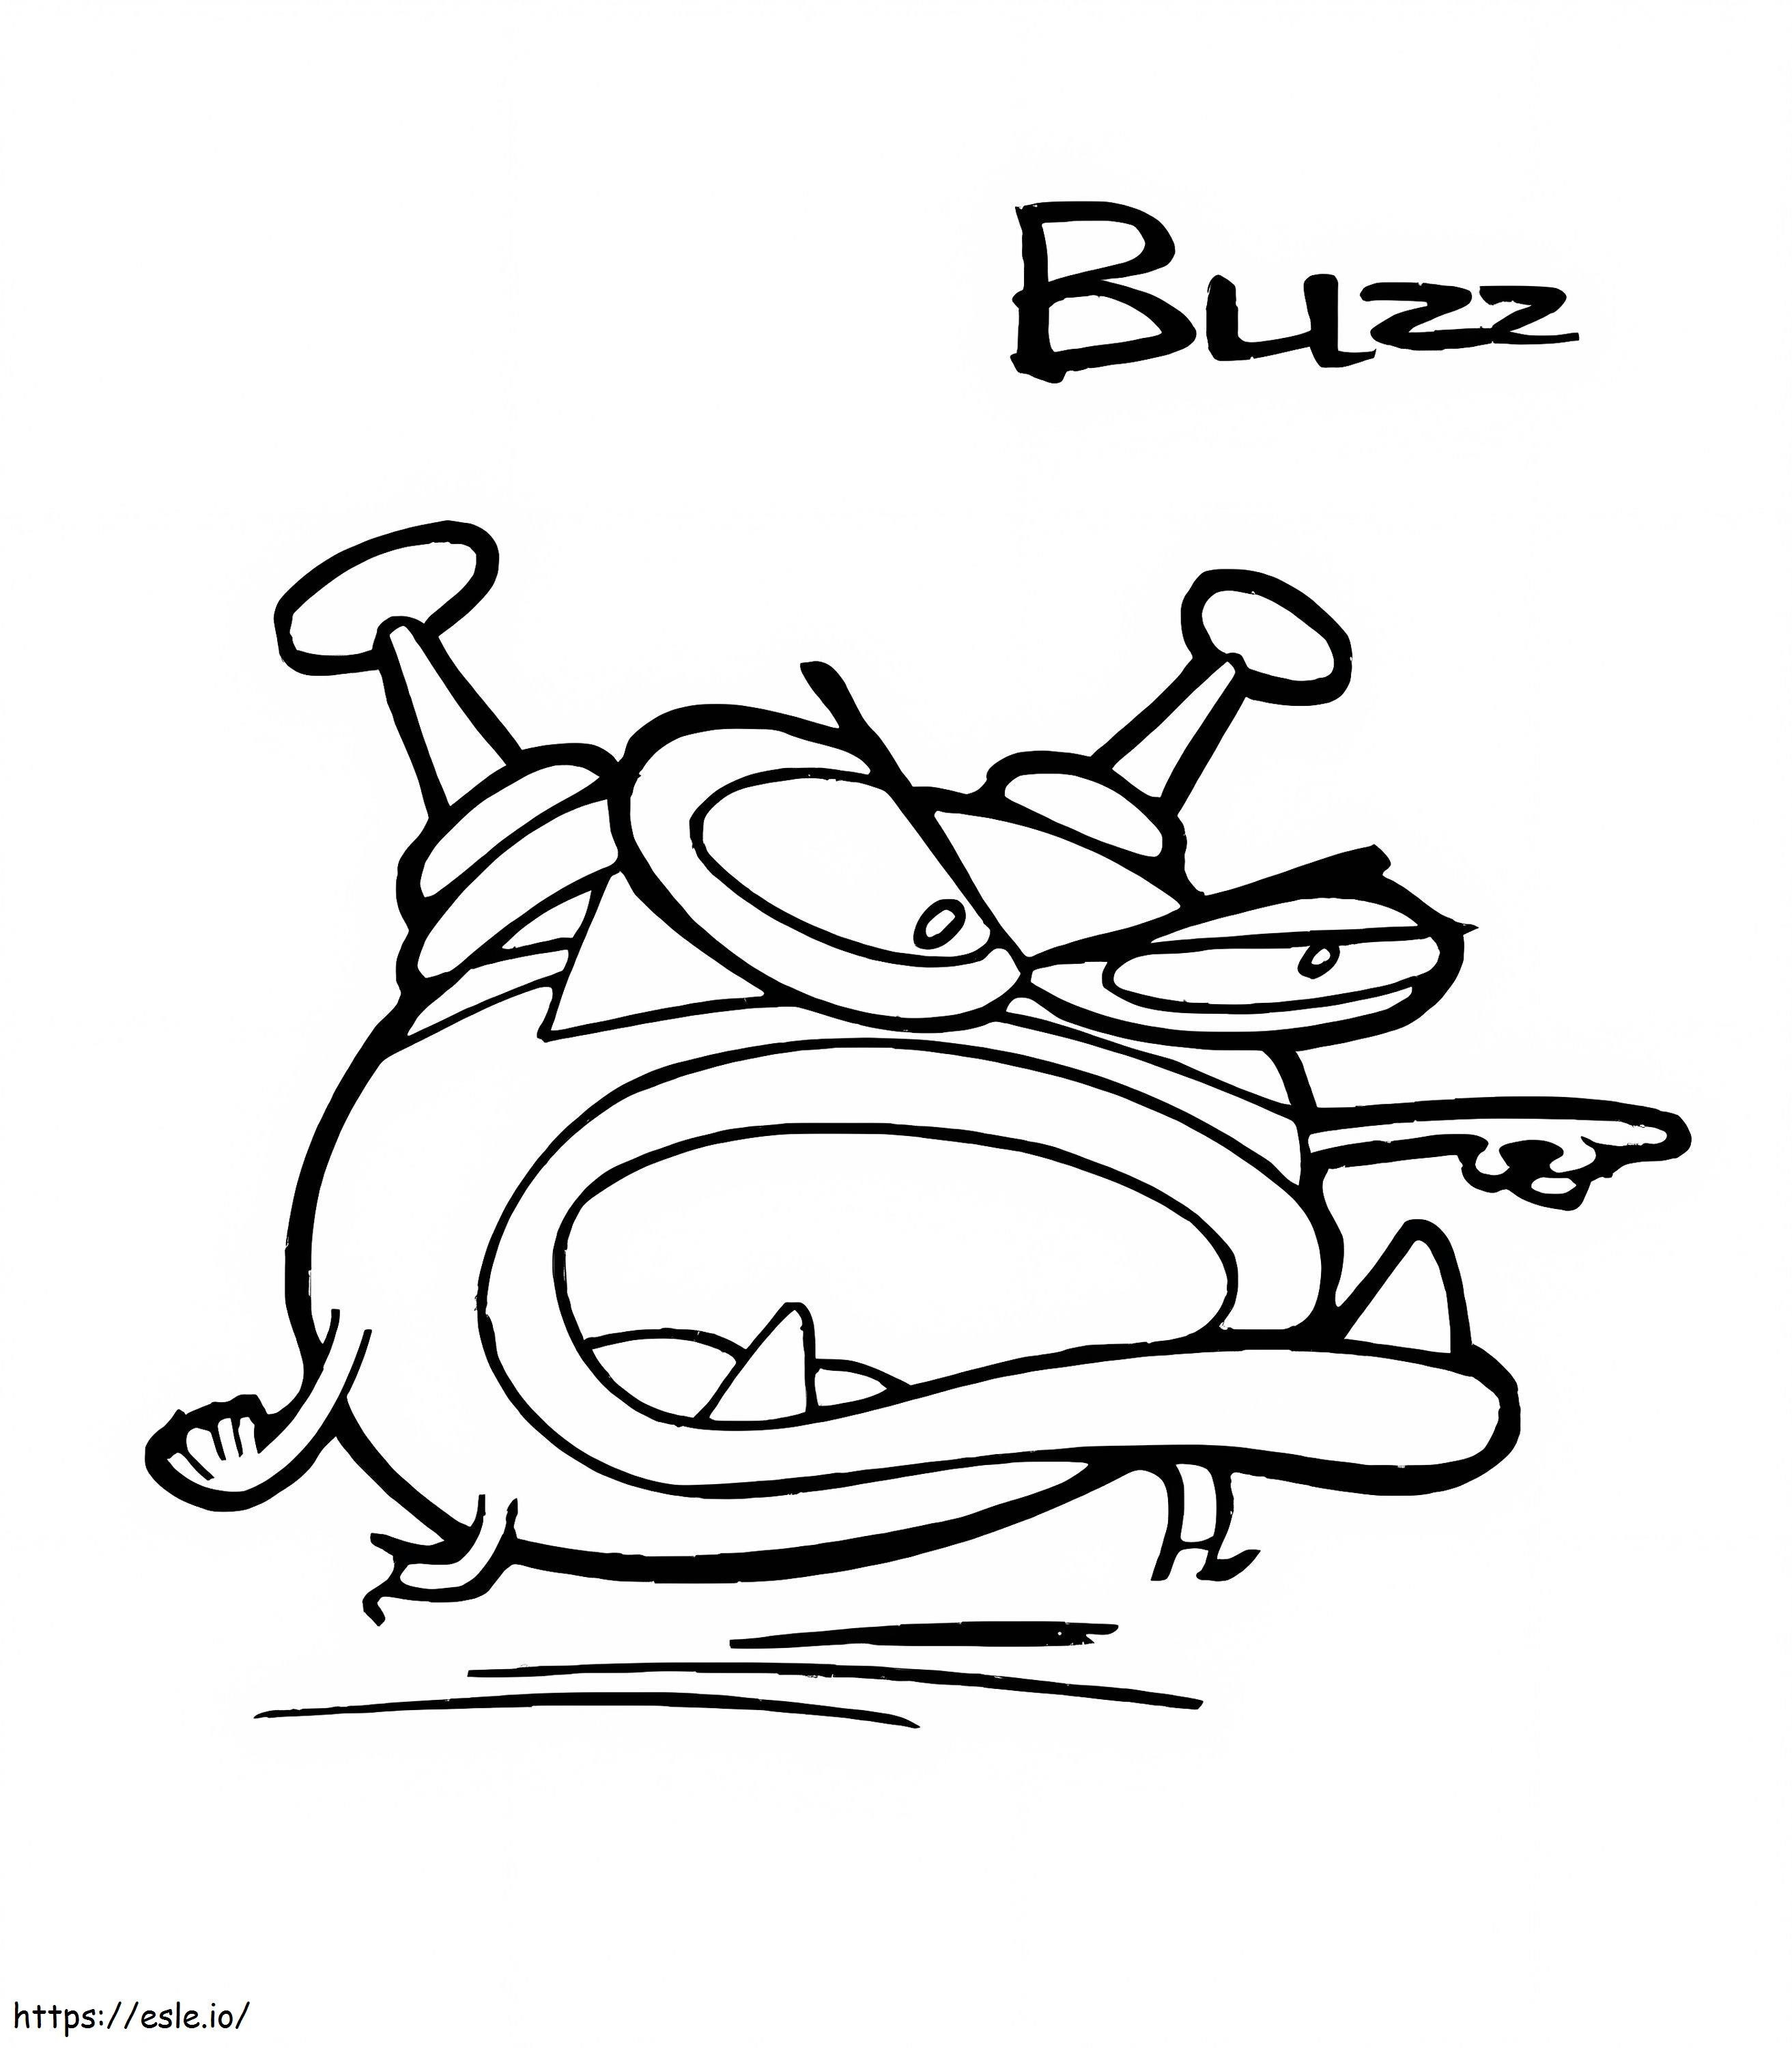 Buzz From Cyberchase coloring page